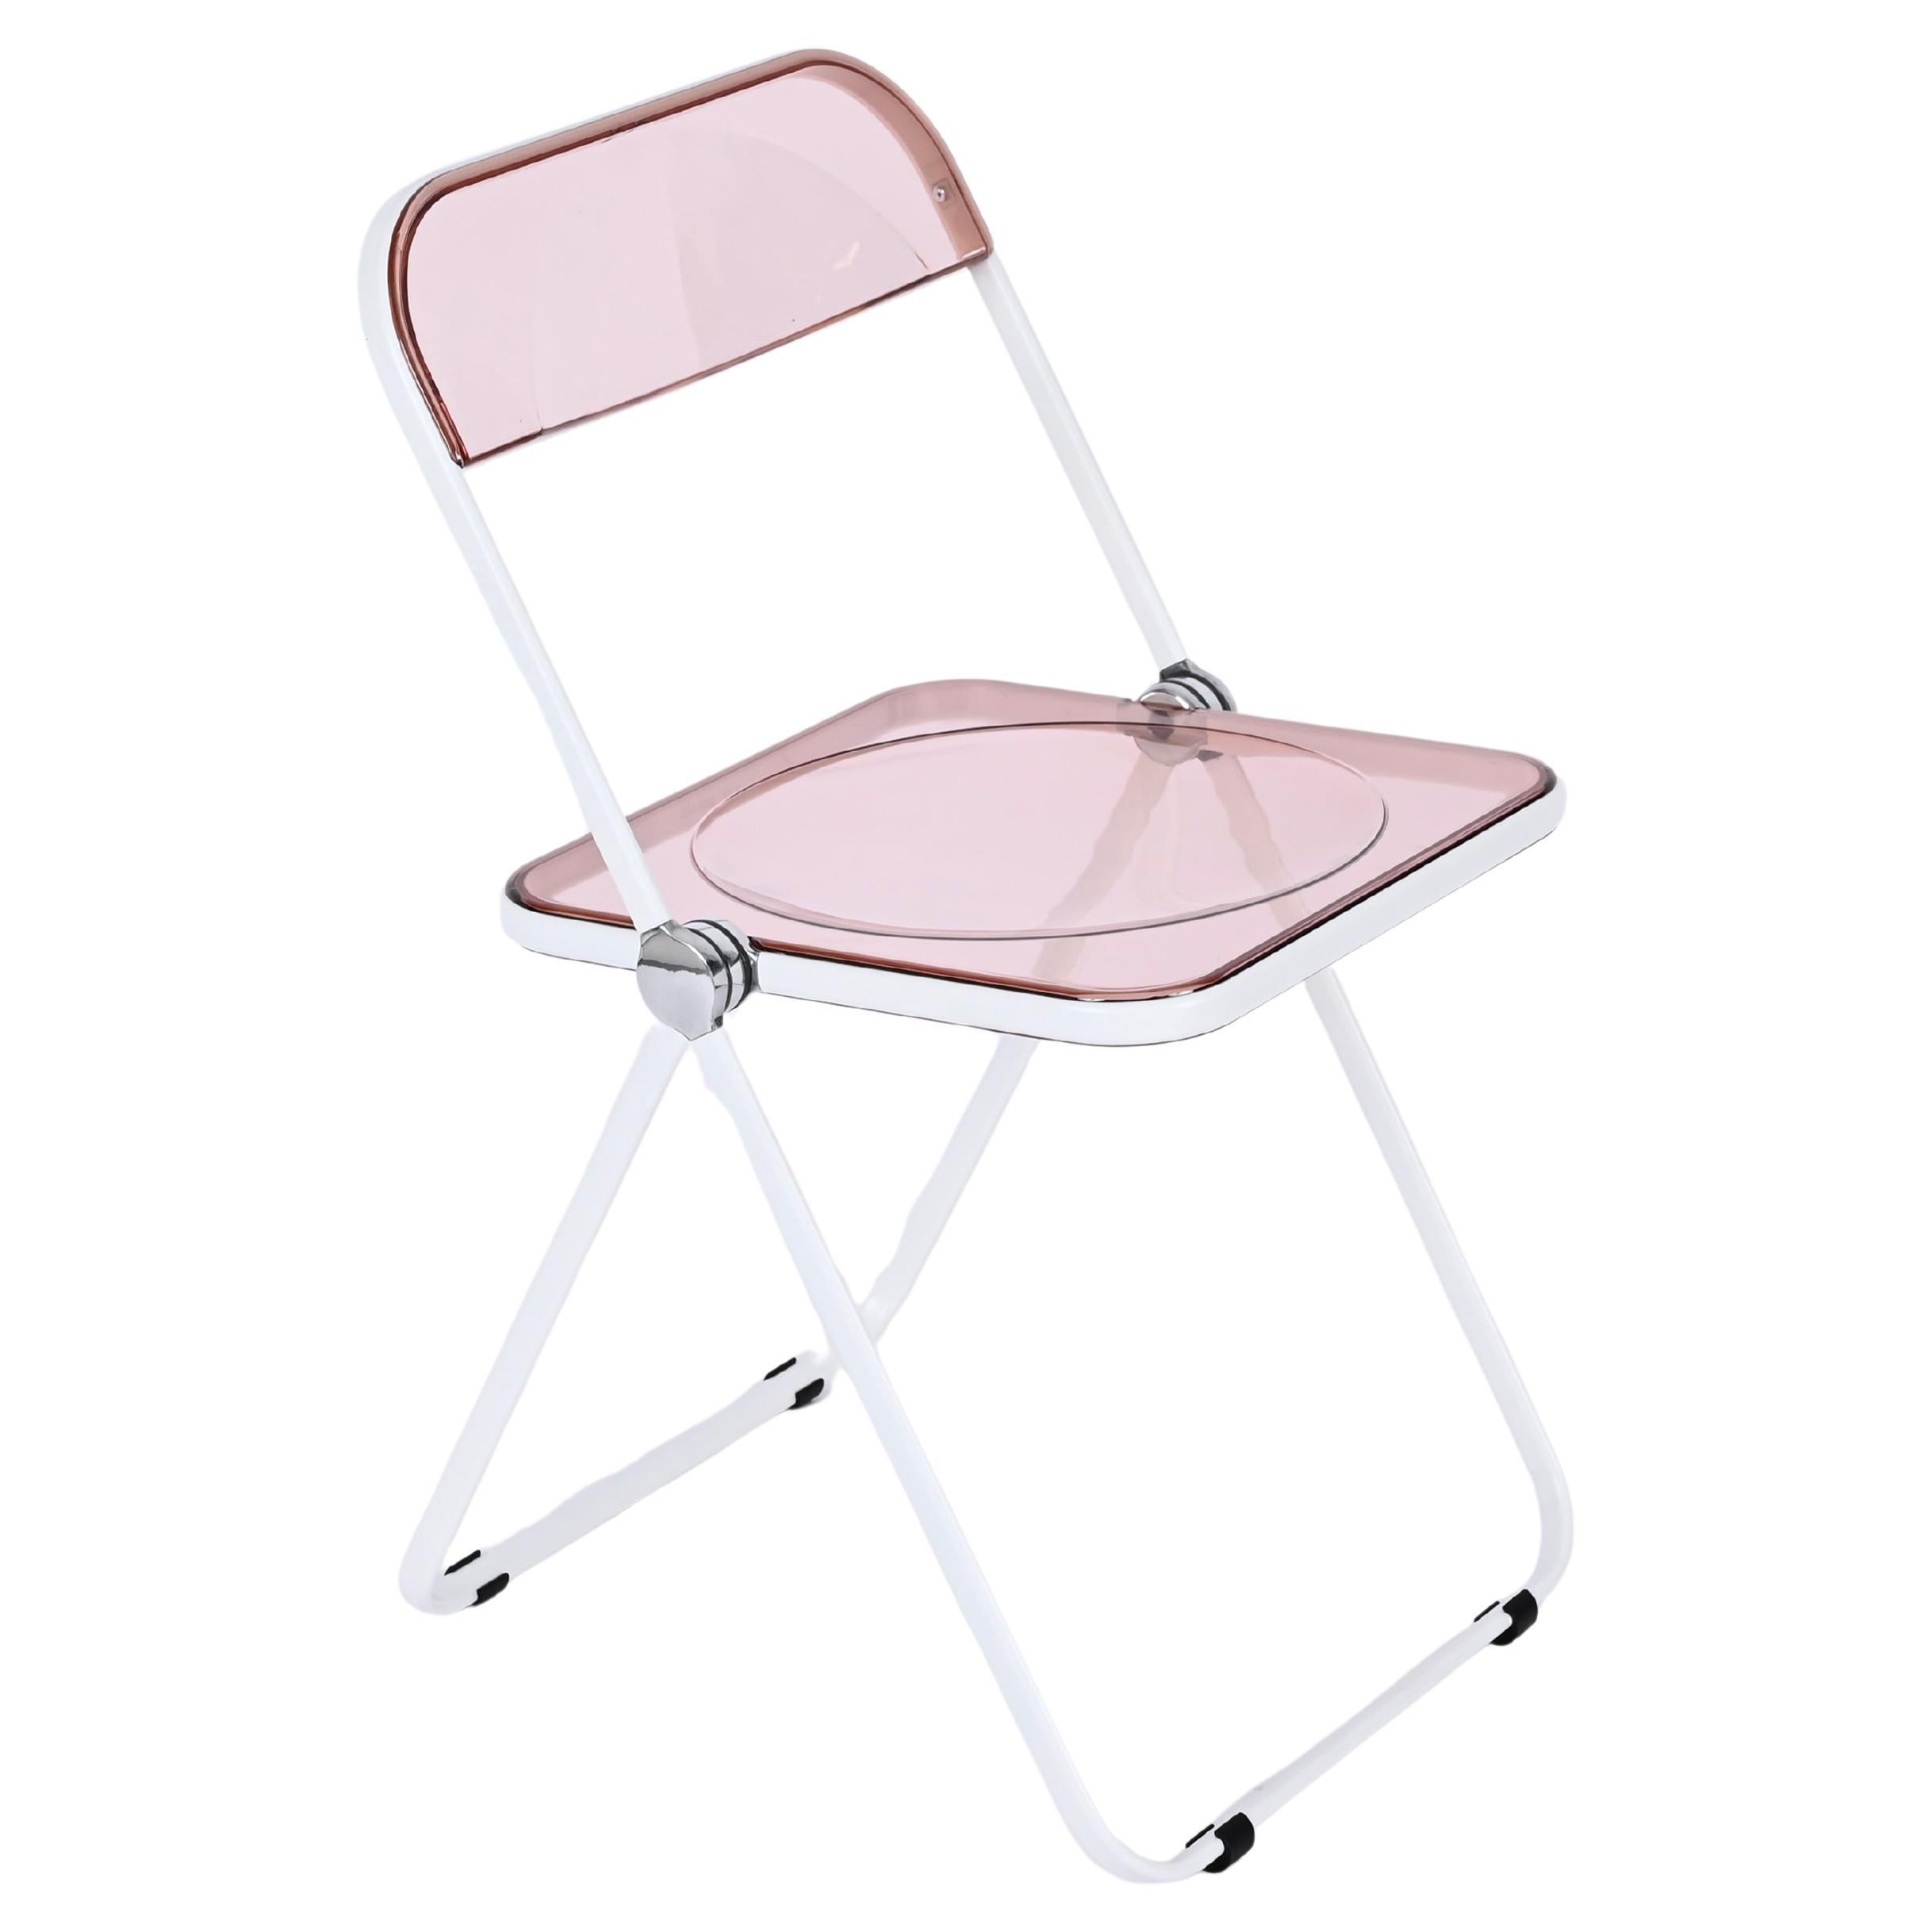 Giancarlo Piretti Lucite Pink and White Folding Plia Chairs for Castelli, 1970s For Sale